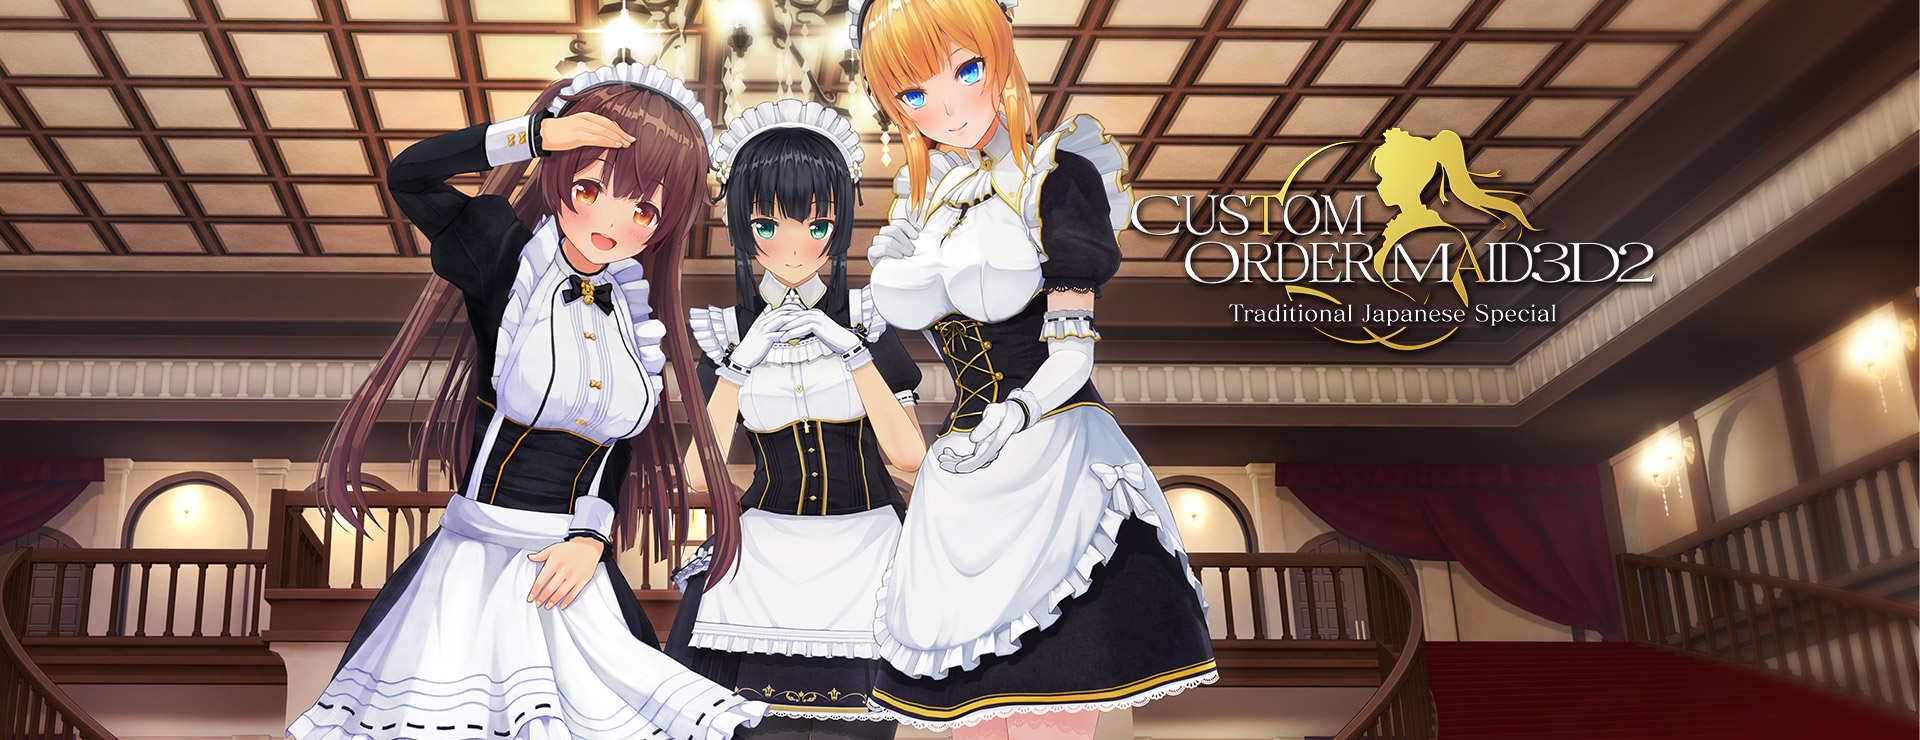 Custom Order Maid 3D2: Traditional Japanese Special All in Pack - Simulación Juego